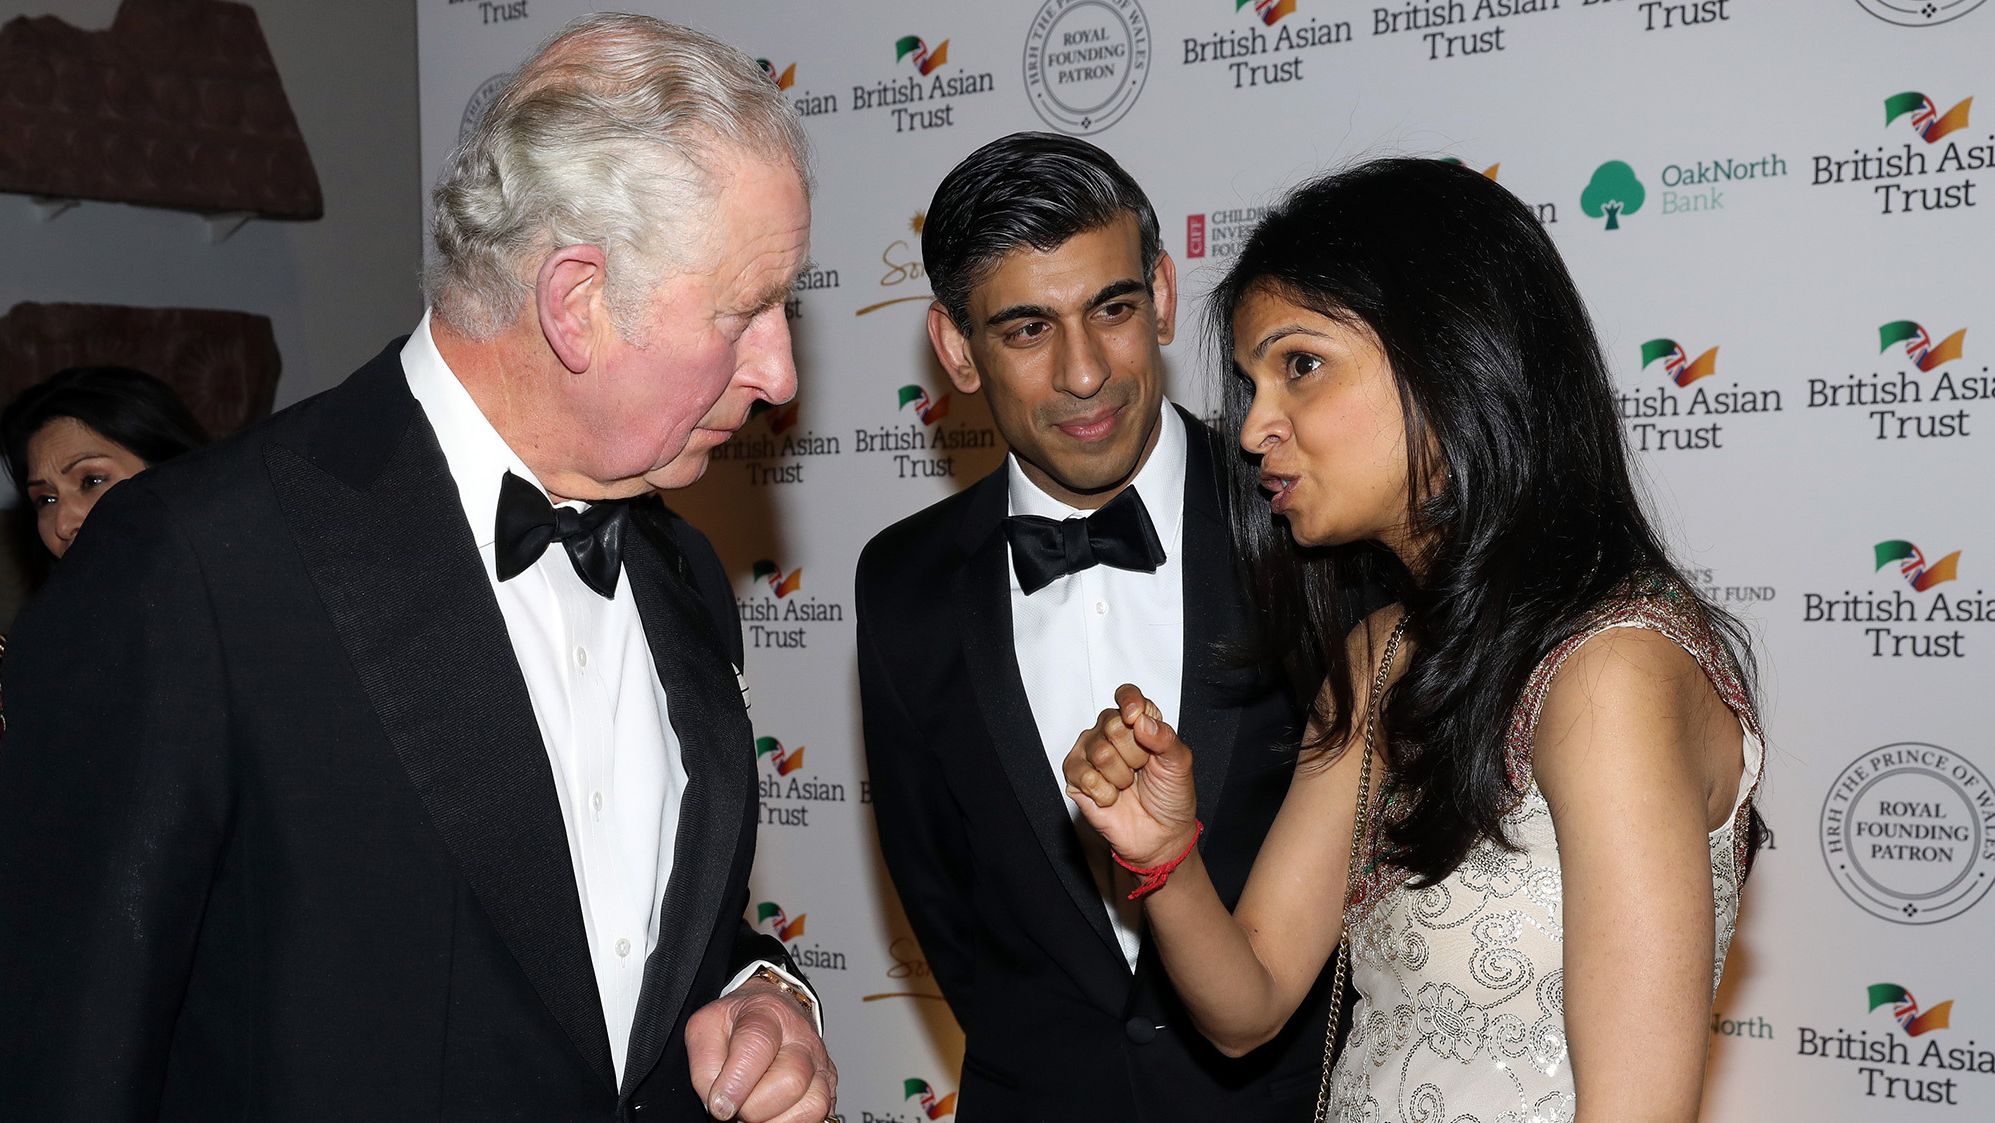 Sunak and his wife, Akshata Murty, speak to Prince Charles during a reception at the British Museum in London in February 2022. Murty is the daughter of an Indian billionaire. Earlier this year, Sunak and Murty appeared on the Sunday Times Rich List of <a href="https://www.thetimes.co.uk/article/rishi-sunak-akshata-murty-net-worth-sunday-times-rich-list-86ls8n09h" target="_blank" target="_blank">the UK's 250 wealthiest people</a>. The newspaper estimated their joint net worth at £730 million ($826 million).